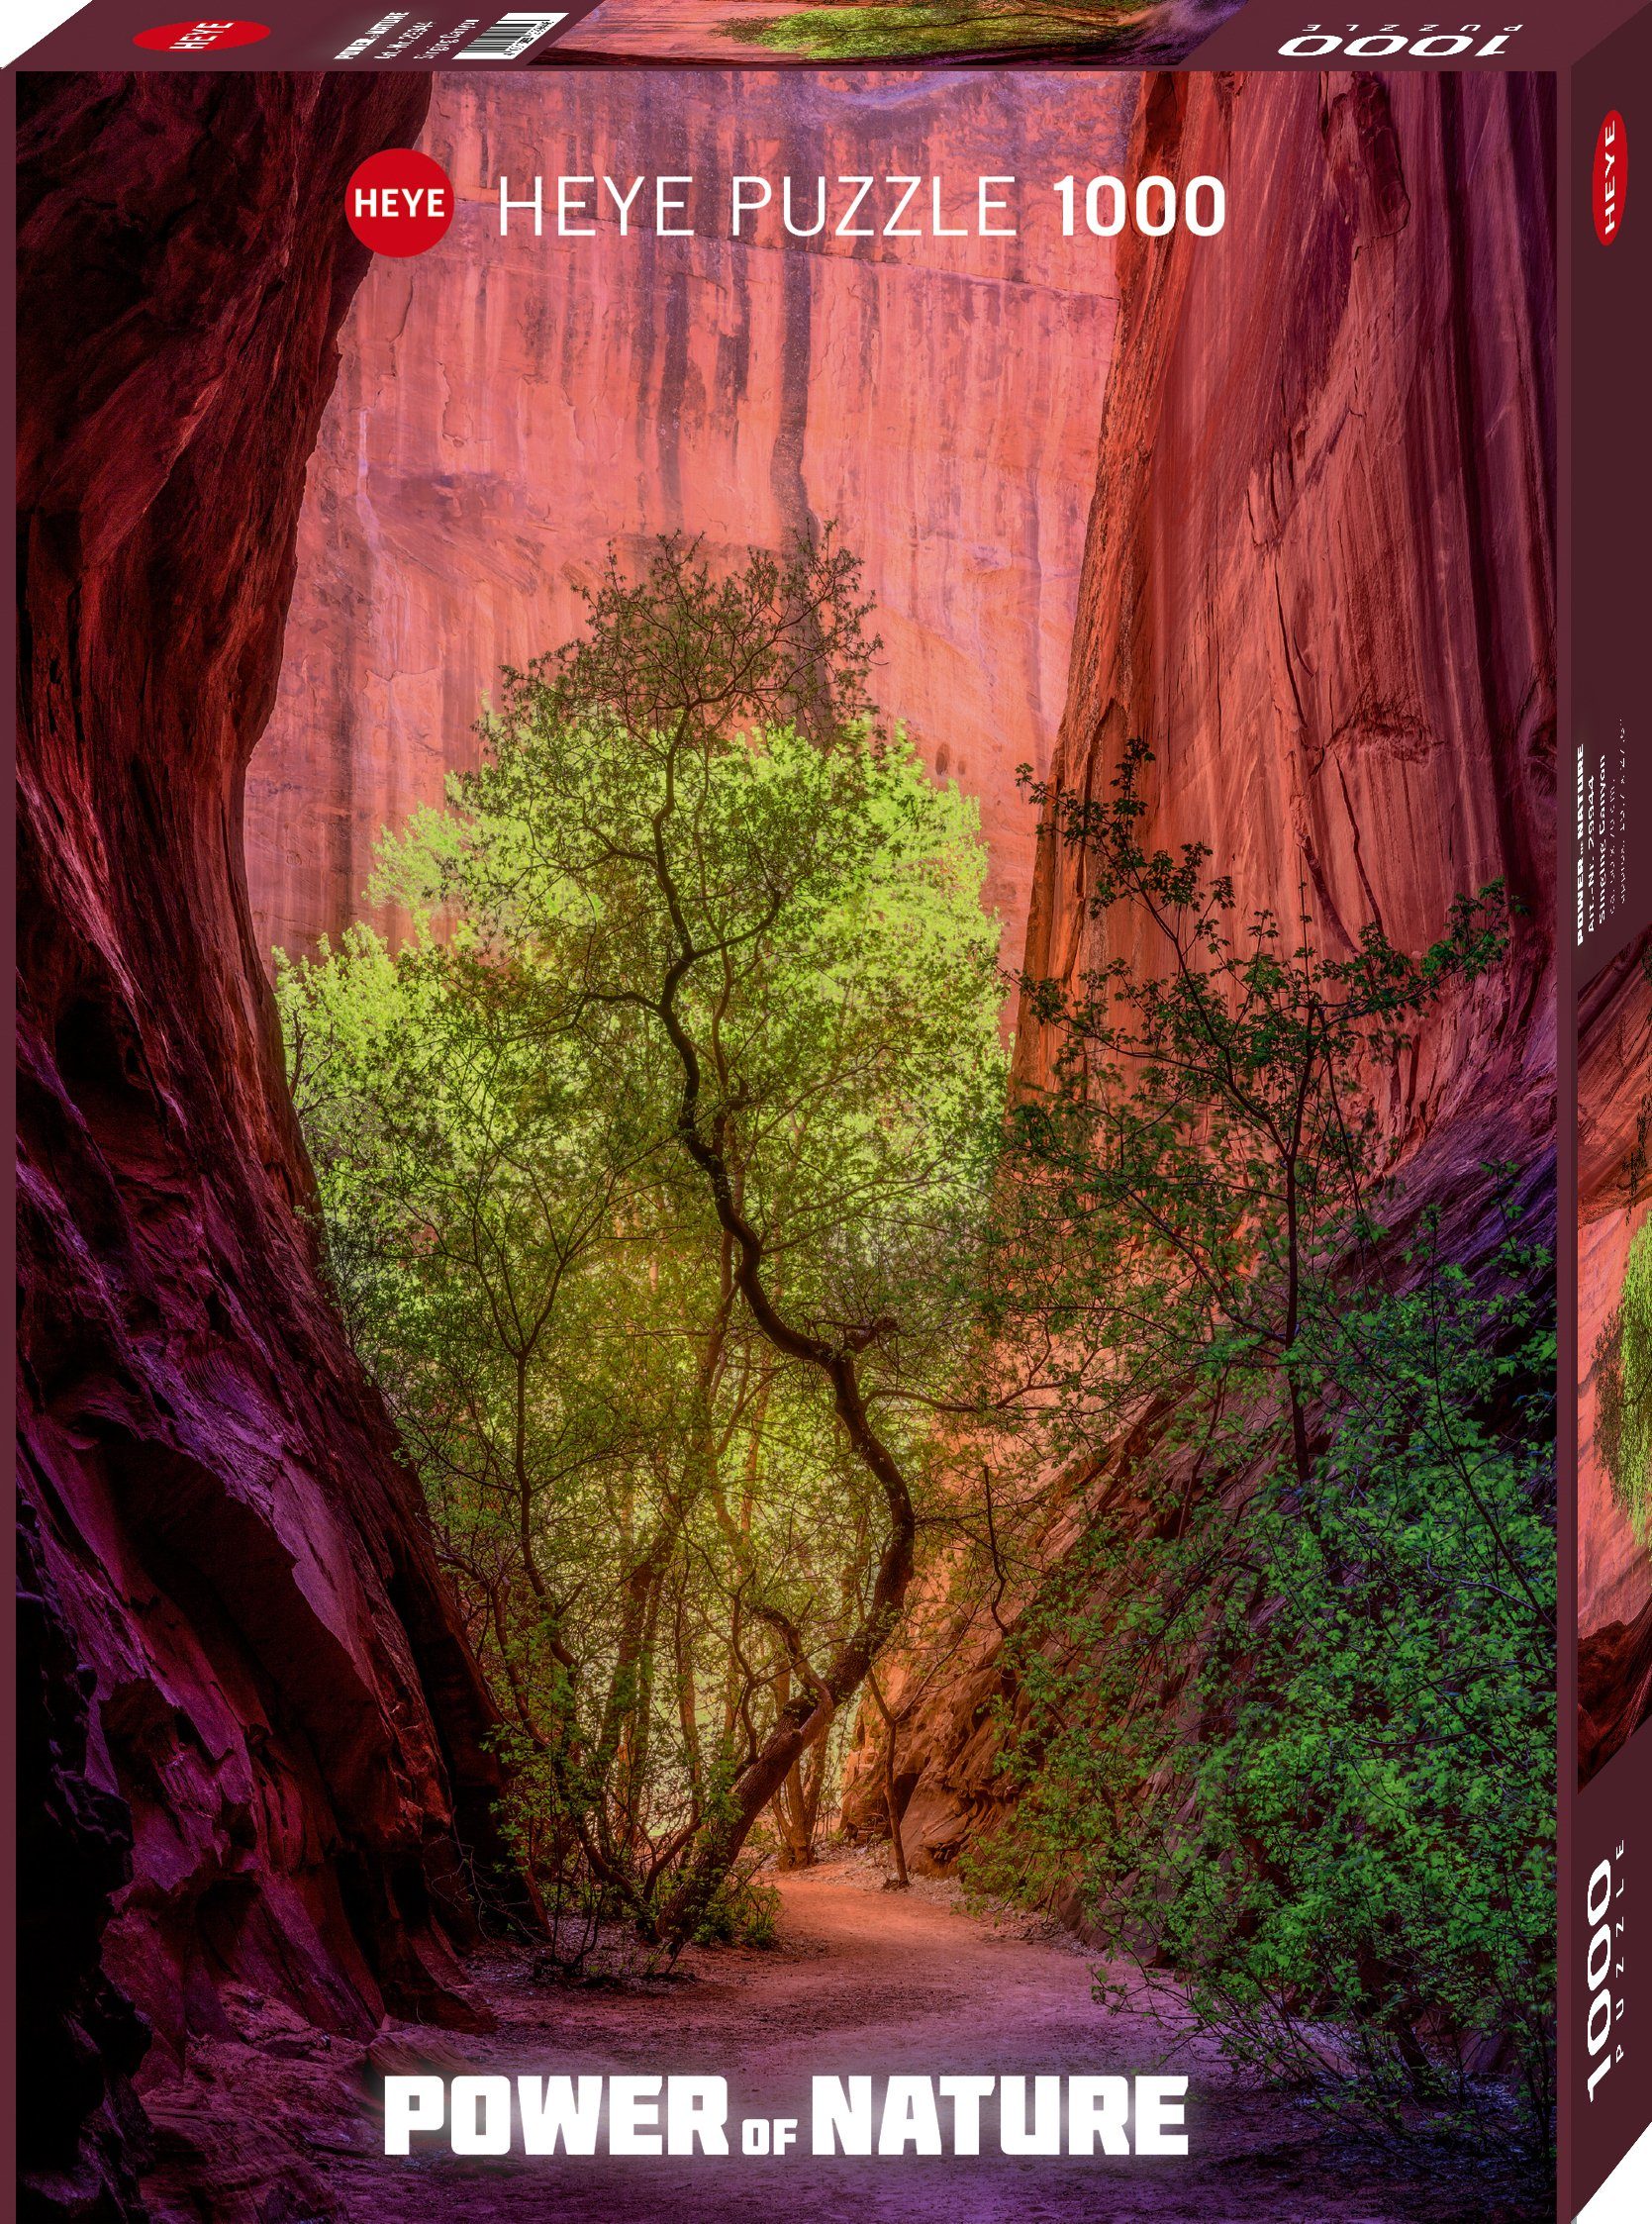 HEYE Puzzle Singing Canyon / Power of Nature, 1000 Puzzleteile, Made in Germany